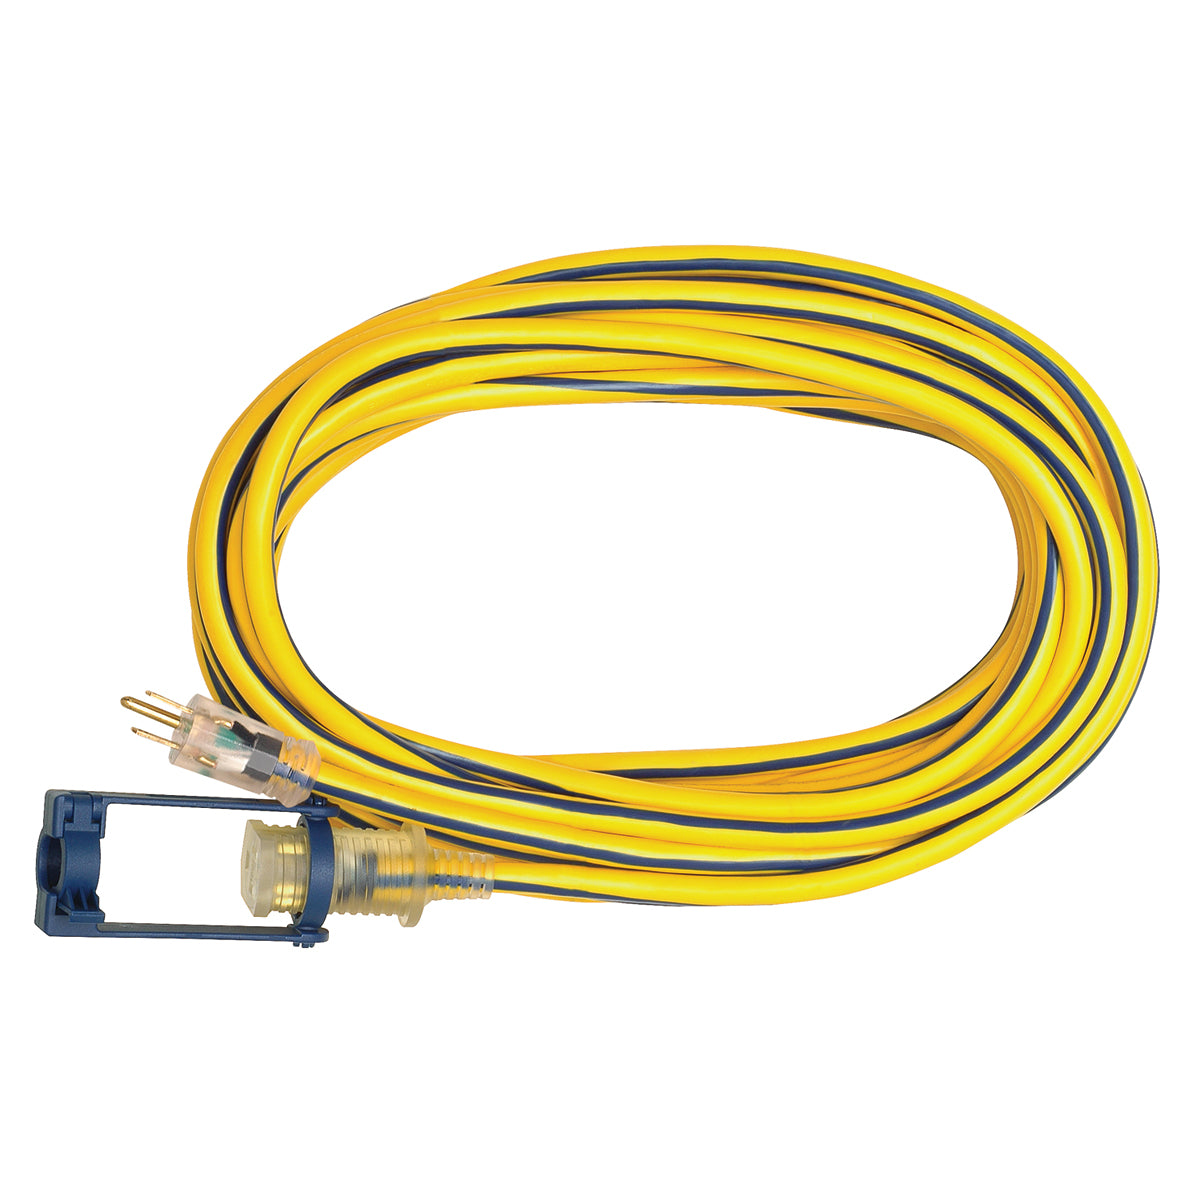 12/3X25' YELLOW/BLUE EXT. CORD, LIGHTED ENDS